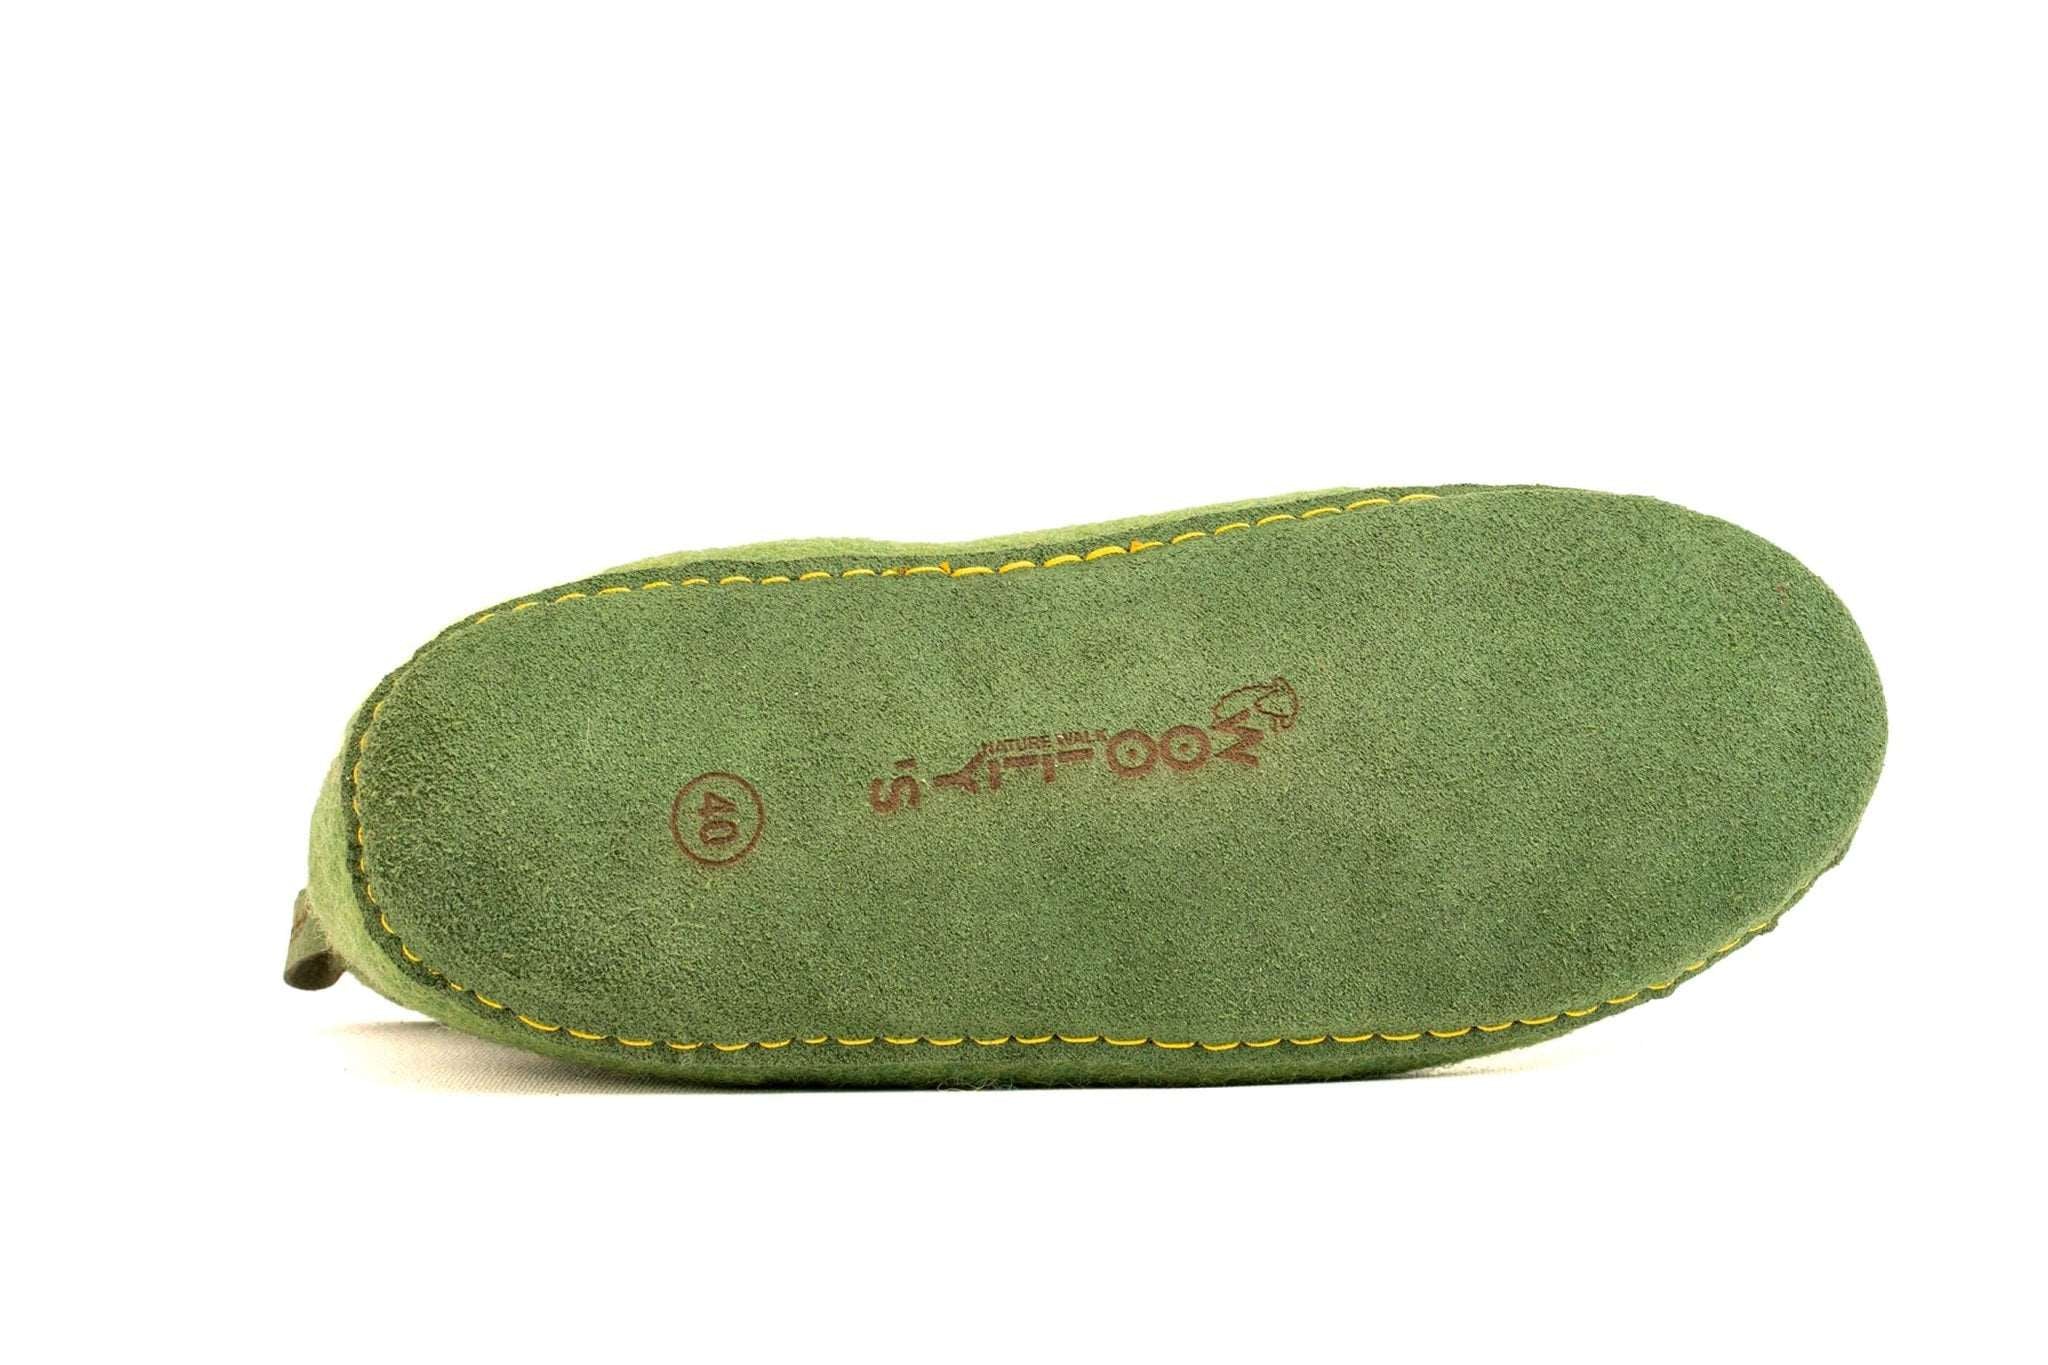 Indoor Boots With Leather Sole - Green - Woollyes